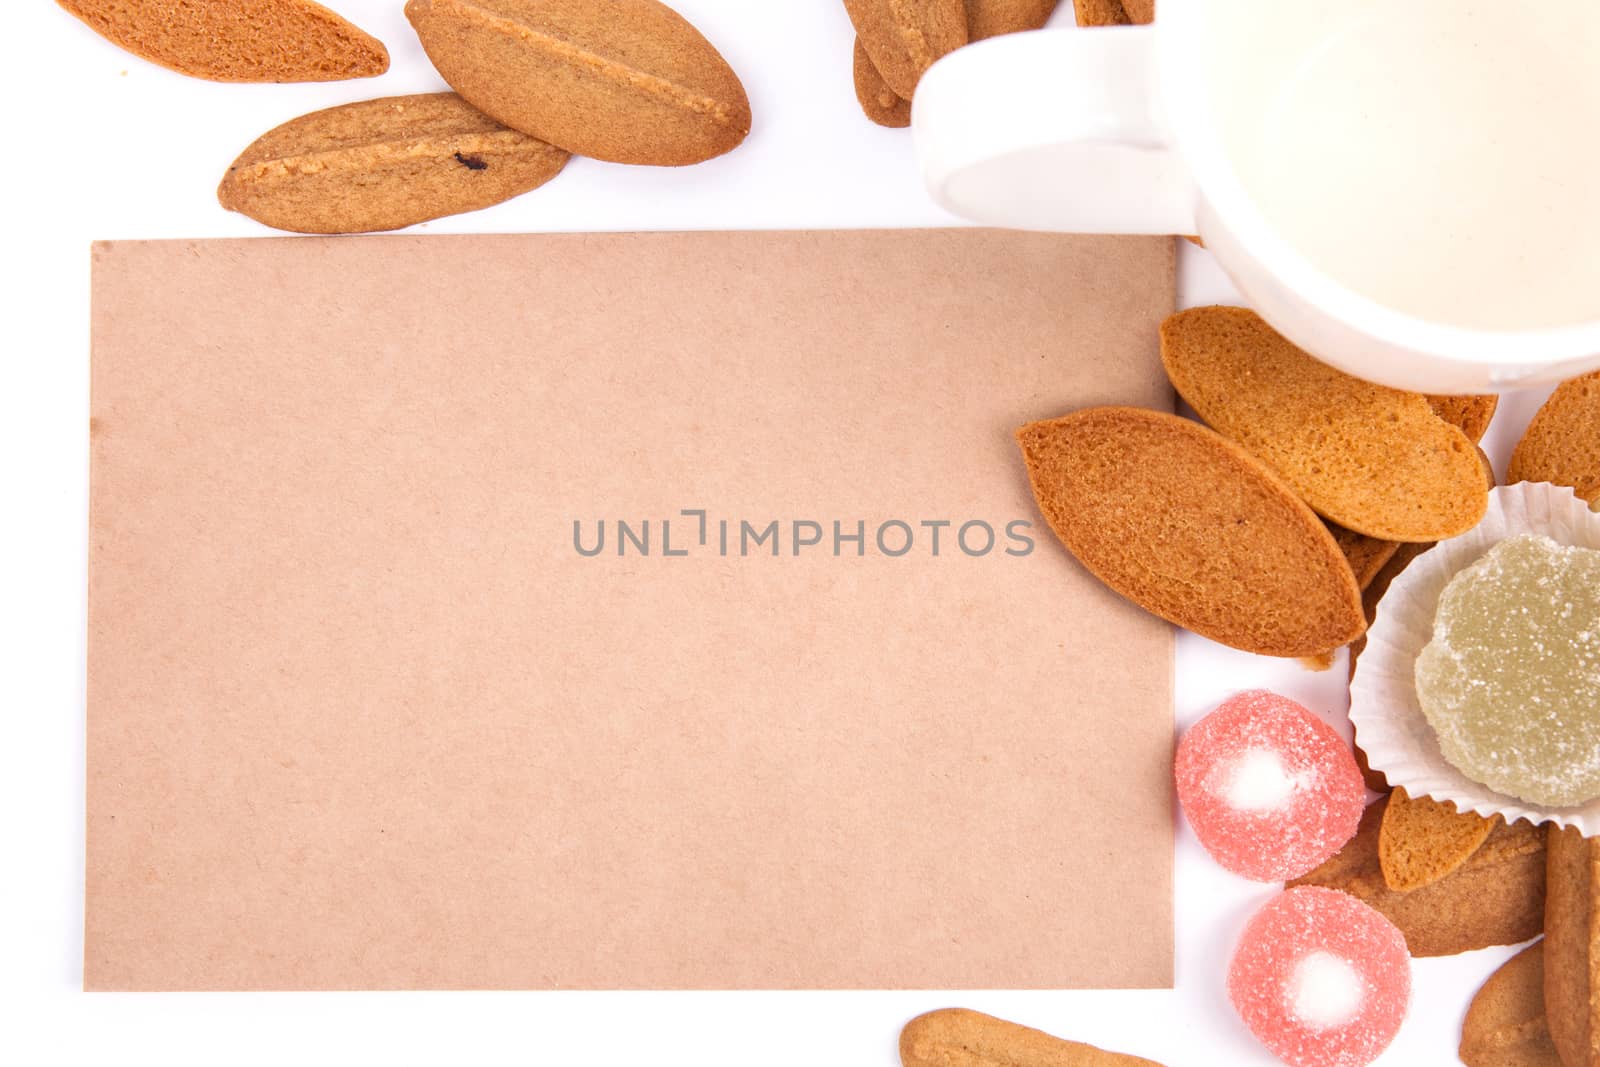 background biscuits, waffles, fruit jelly isolated on white background with space for text on the envelope